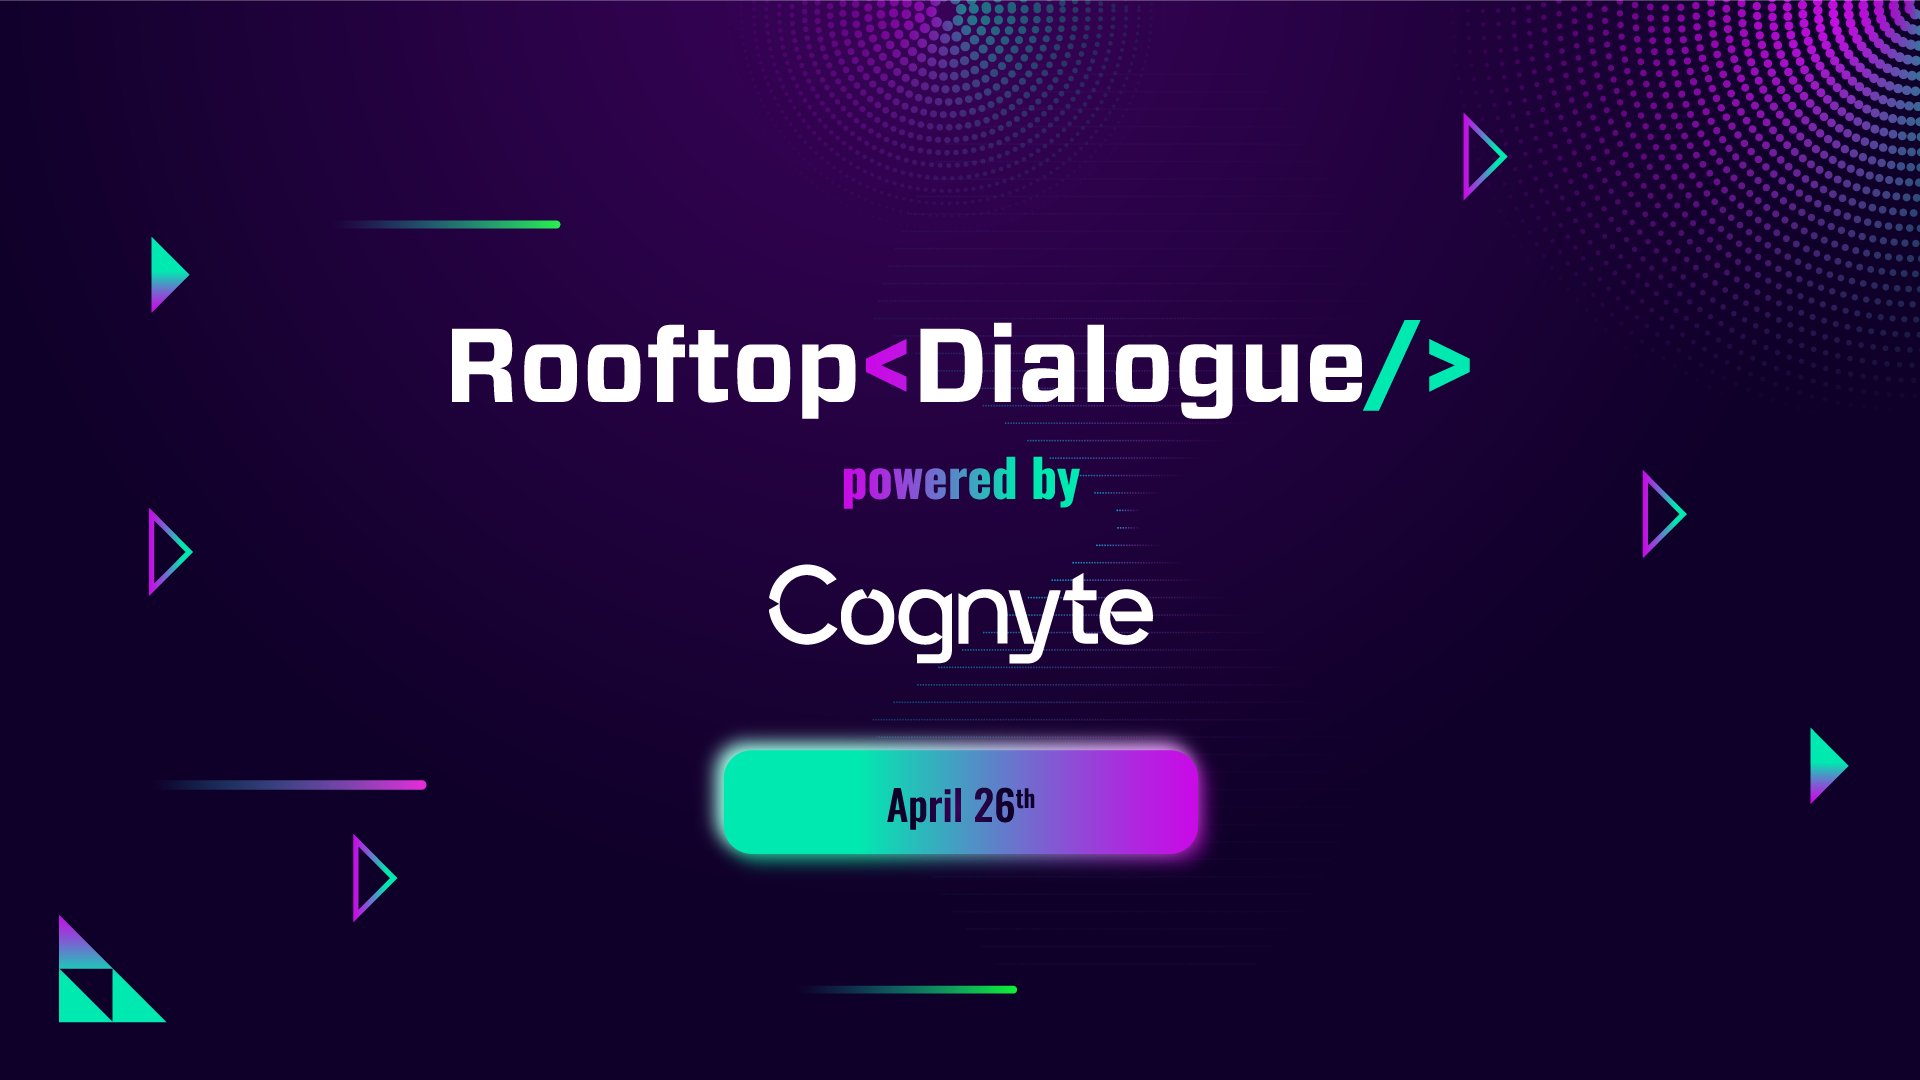 Rooftop Dialogue powered by Cognyte Picture